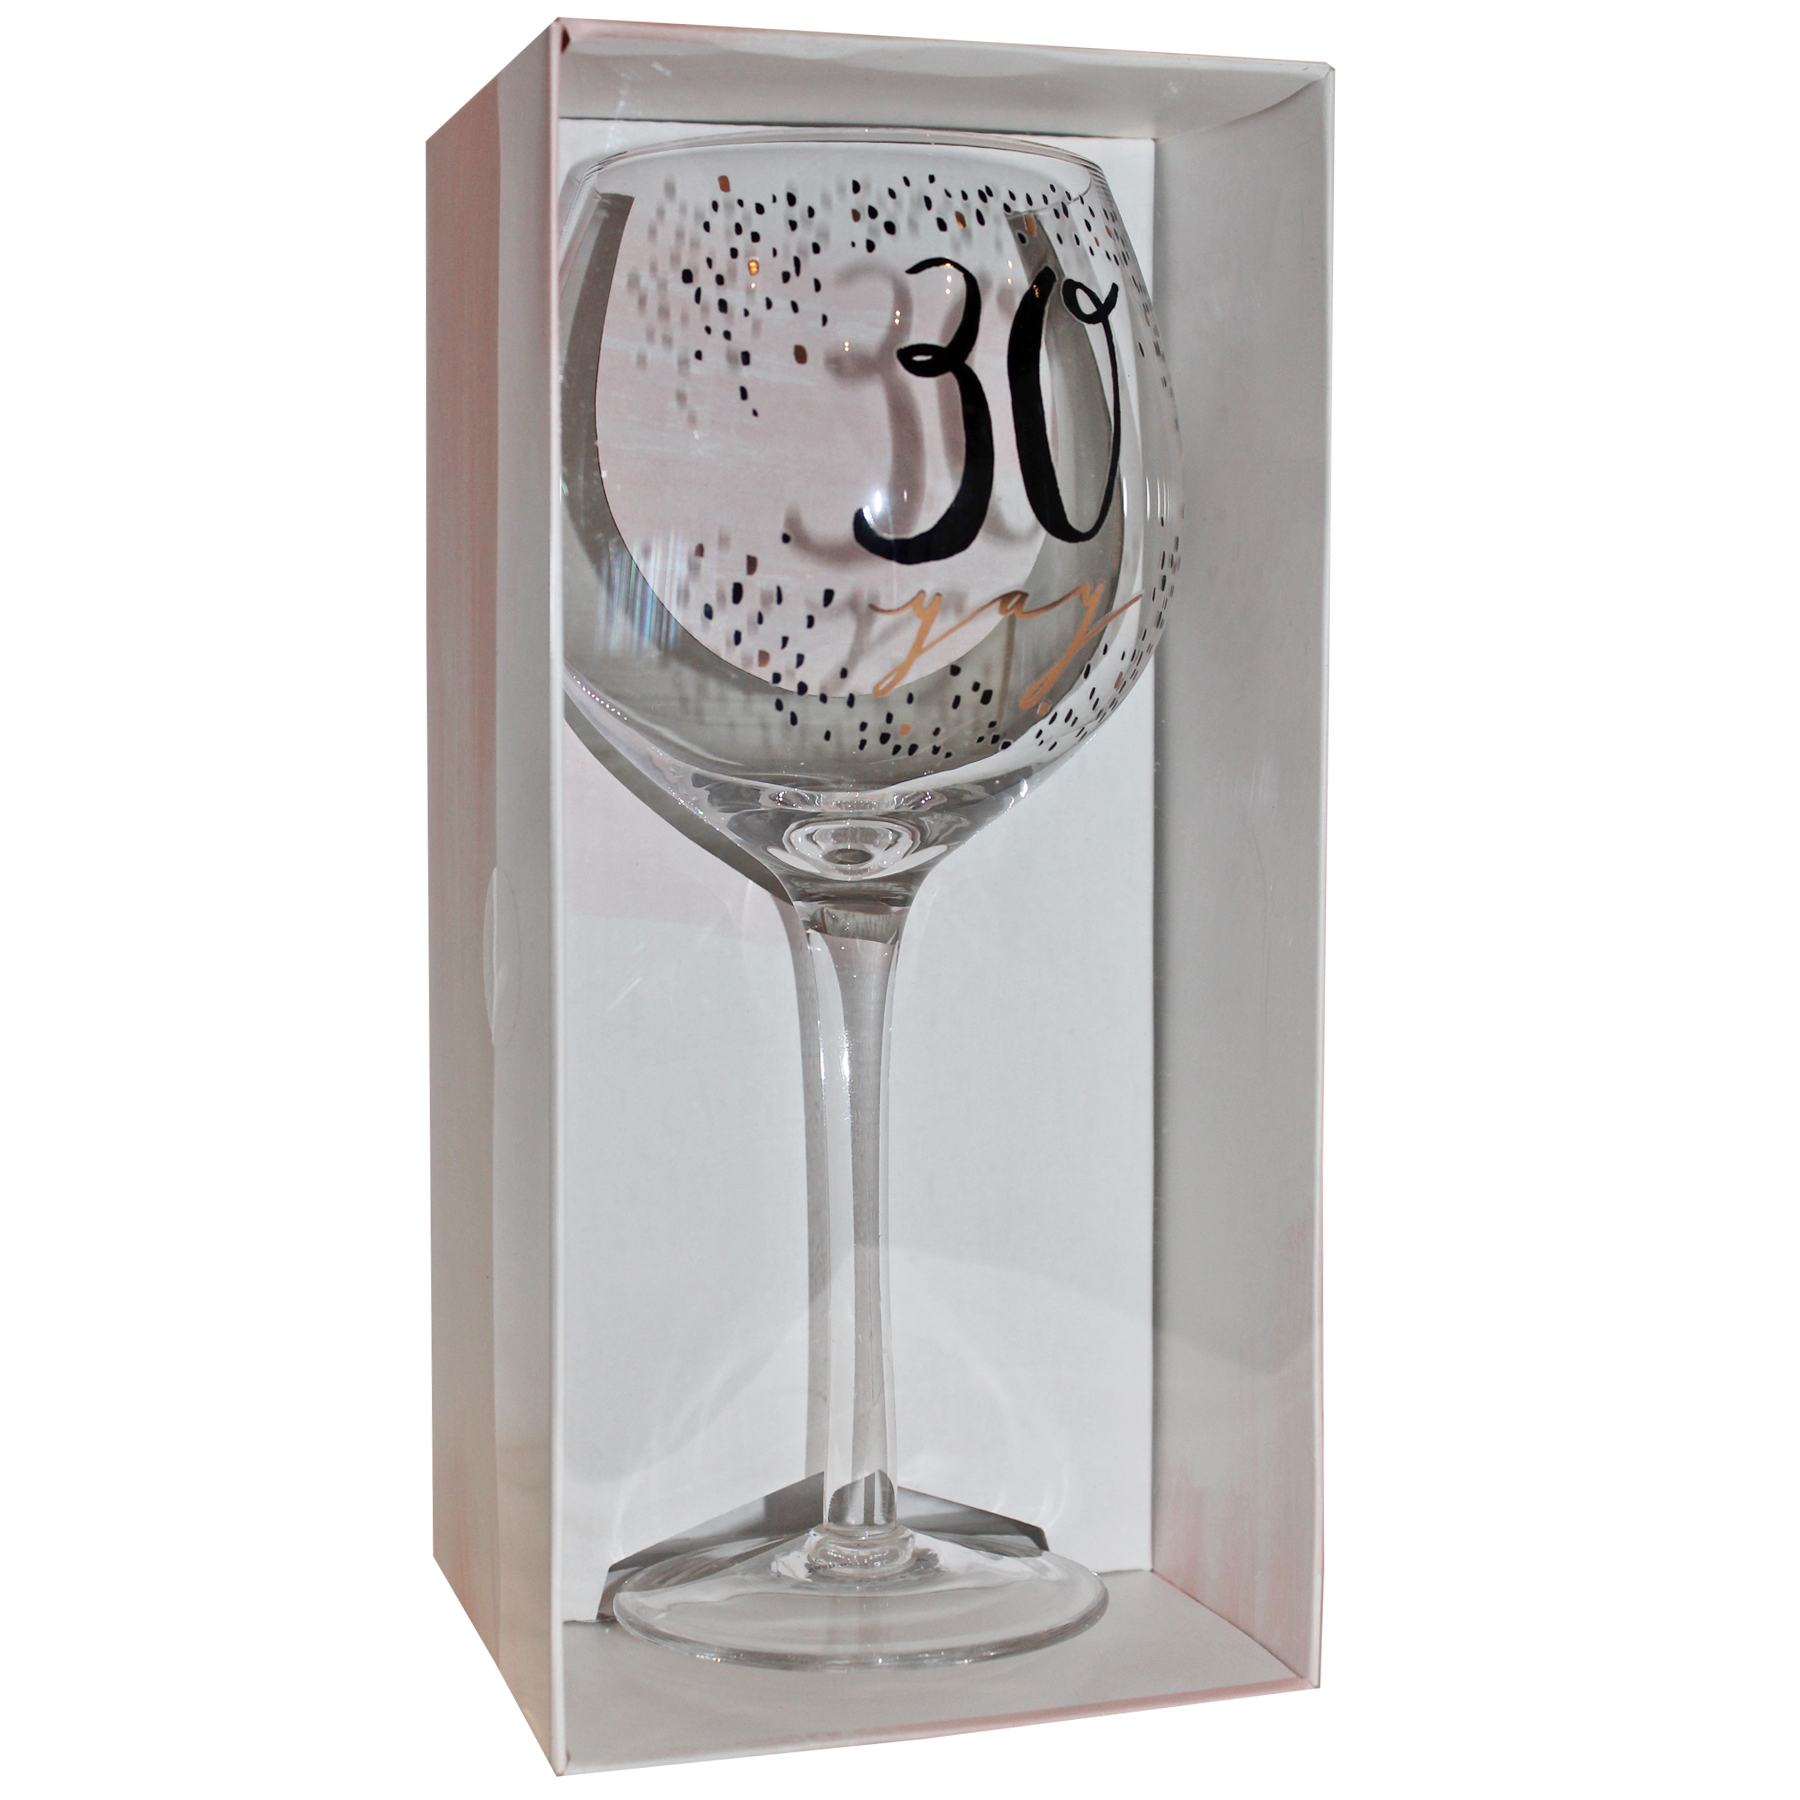 21ST.,30TH 40TH 50TH & 70TH LUXE GIN BIRTHDAY FOILED GLASSES 18TH 60TH